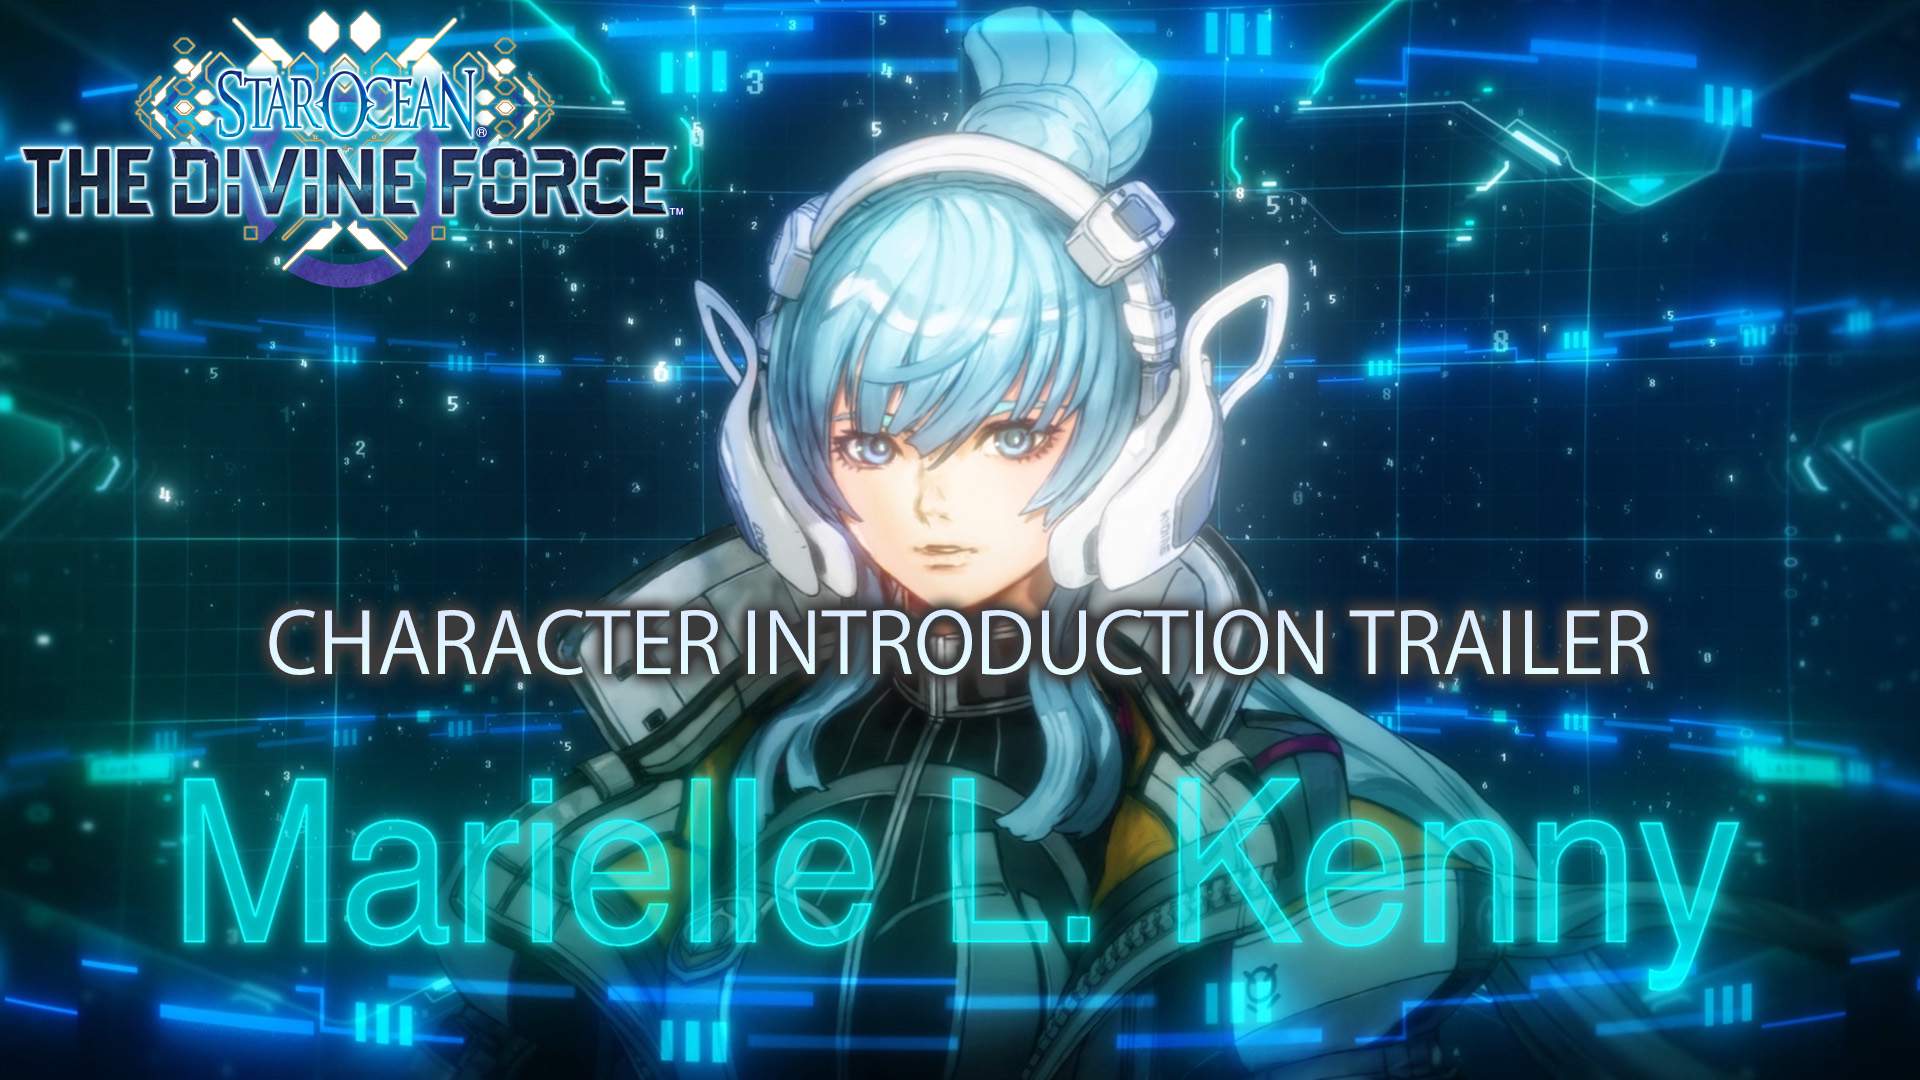 Character Marielle, a soldier of the Pangalactic Federation with the STAR OCEAN logo displayed.